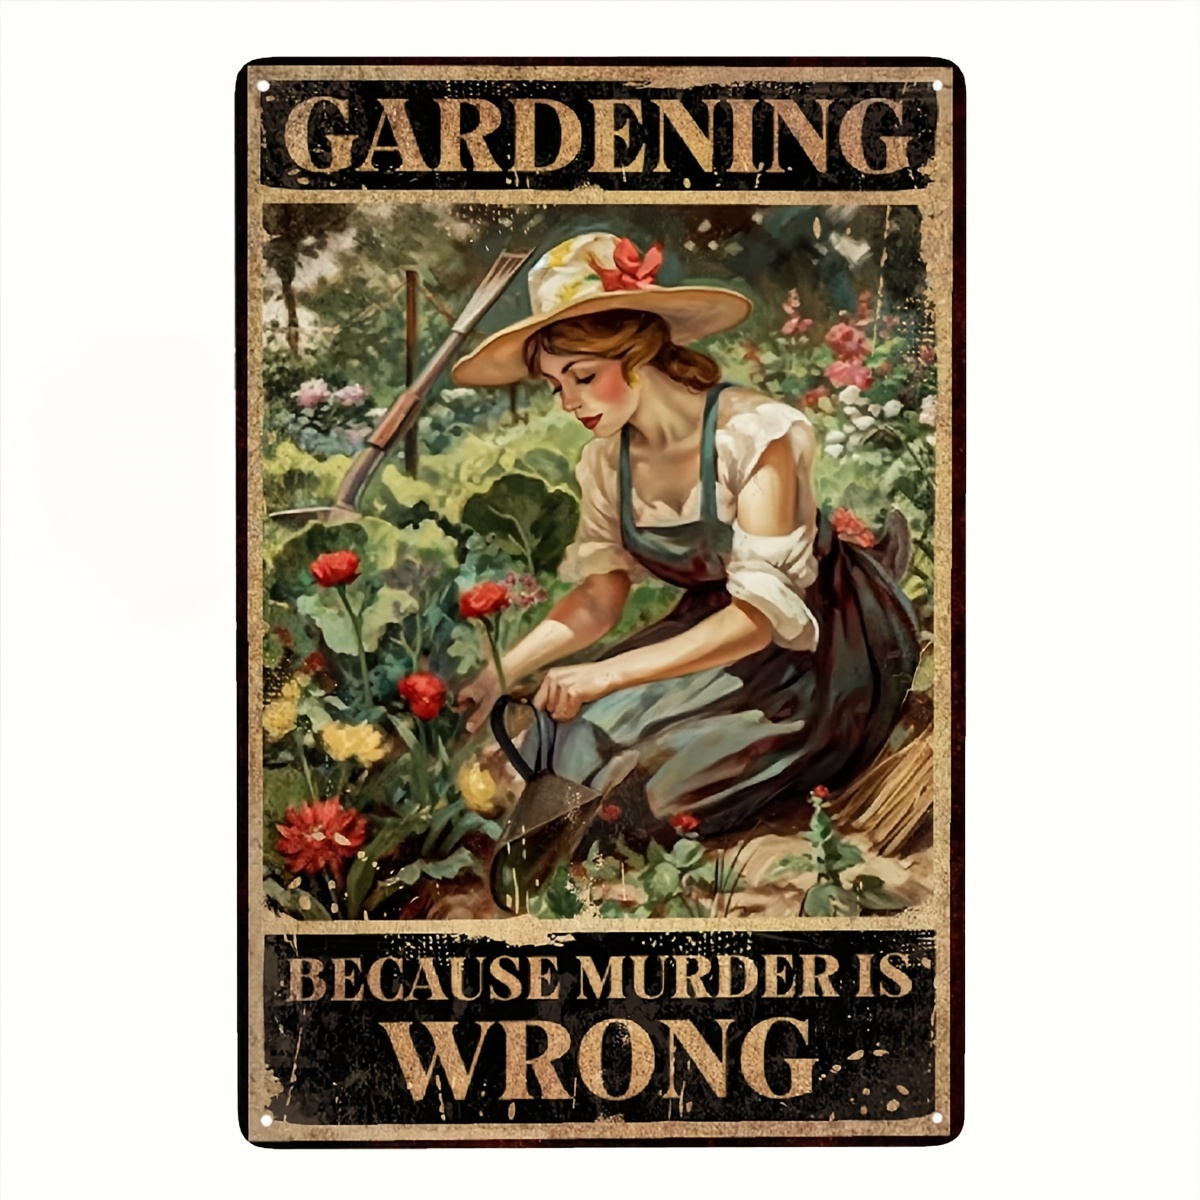 

gardening Because Murder Is Wrong" Vintage Metal Poster Sign - Retro Tin Decor For Garden, Home Wall, Bedroom - Humorous Gift Idea, 12''x8'', Iron Material, 1pc